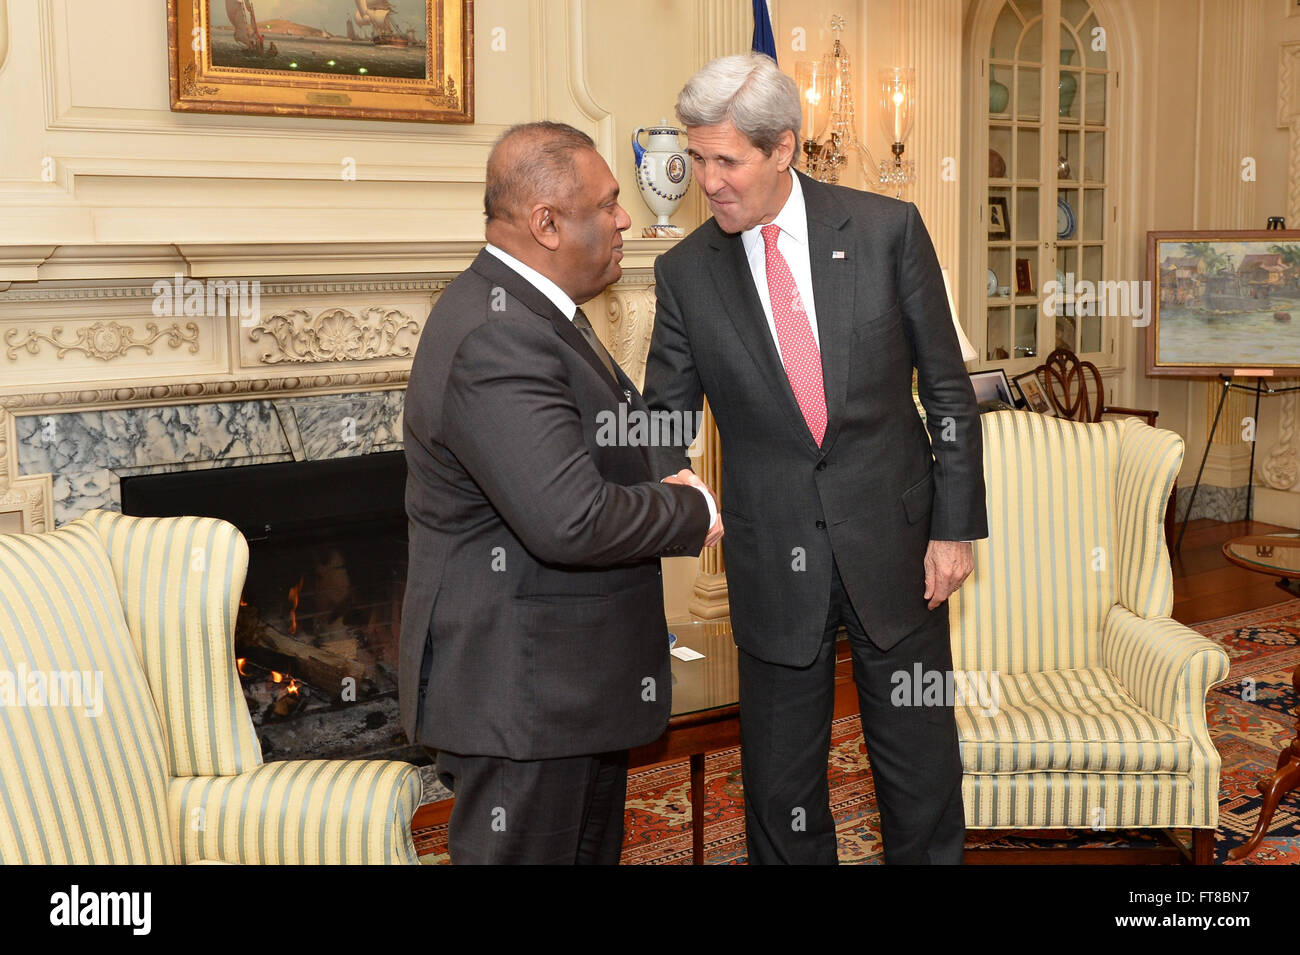 U.S. Secretary of State John Kerry shakes hands with Sri Lankan Foreign Minister Mangala Samaraweera after the counterparts addressed reporters at the U.S. Department of State in Washington, D.C., on February 25, 2016. [State Department photo/ Public Domain] Stock Photo